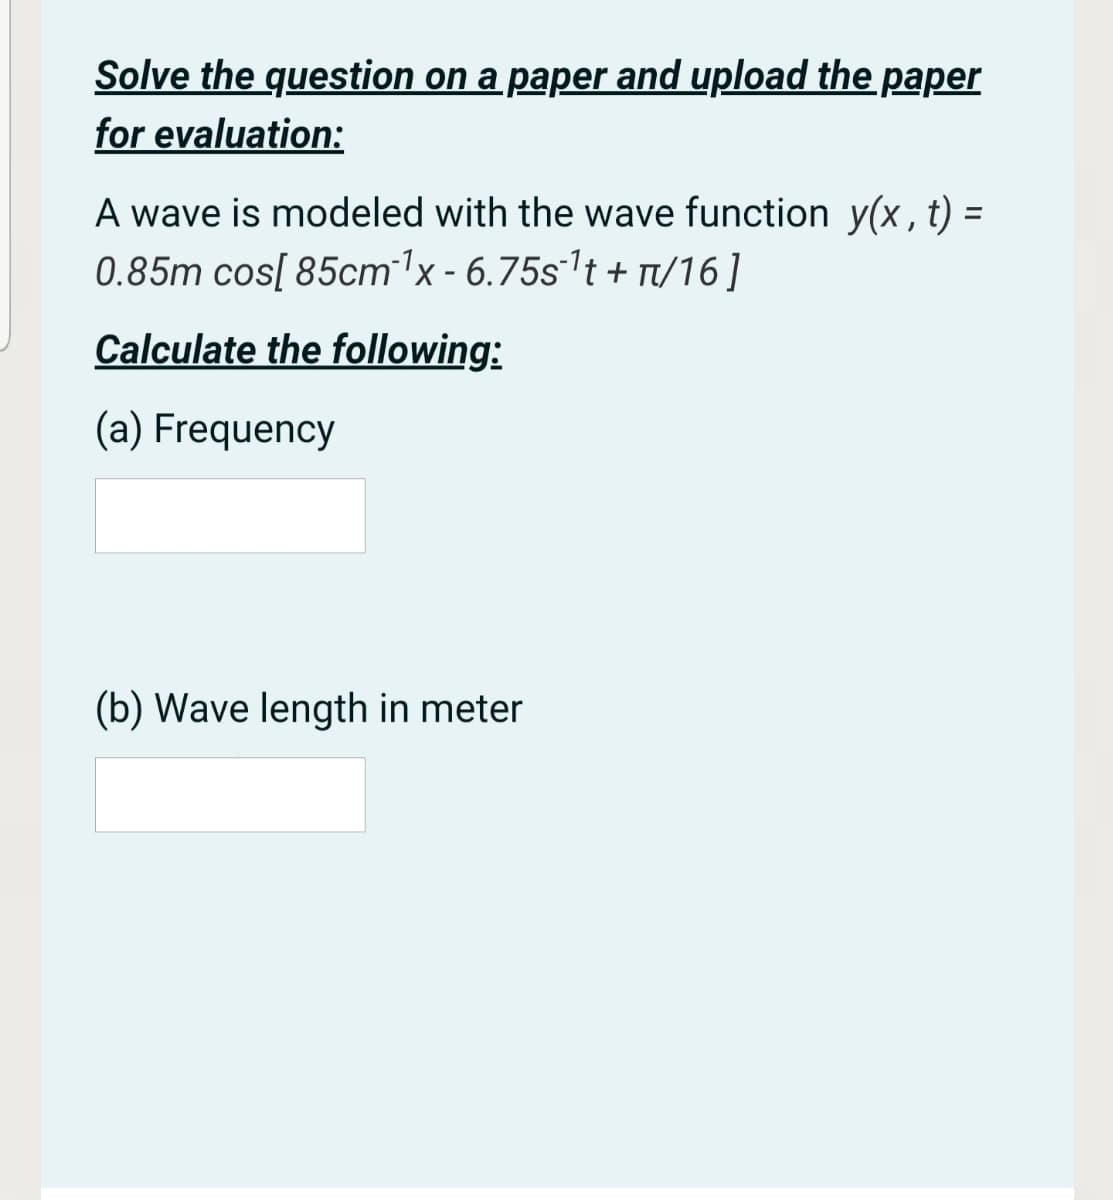 Solve the question on a paper and upload the paper
for evaluation:
A wave is modeled with the wave function y(x, t) =
0.85m cos[ 85cm1x - 6.75s't + T/16]
%3D
Calculate the following:
(a) Frequency
(b) Wave length in meter
